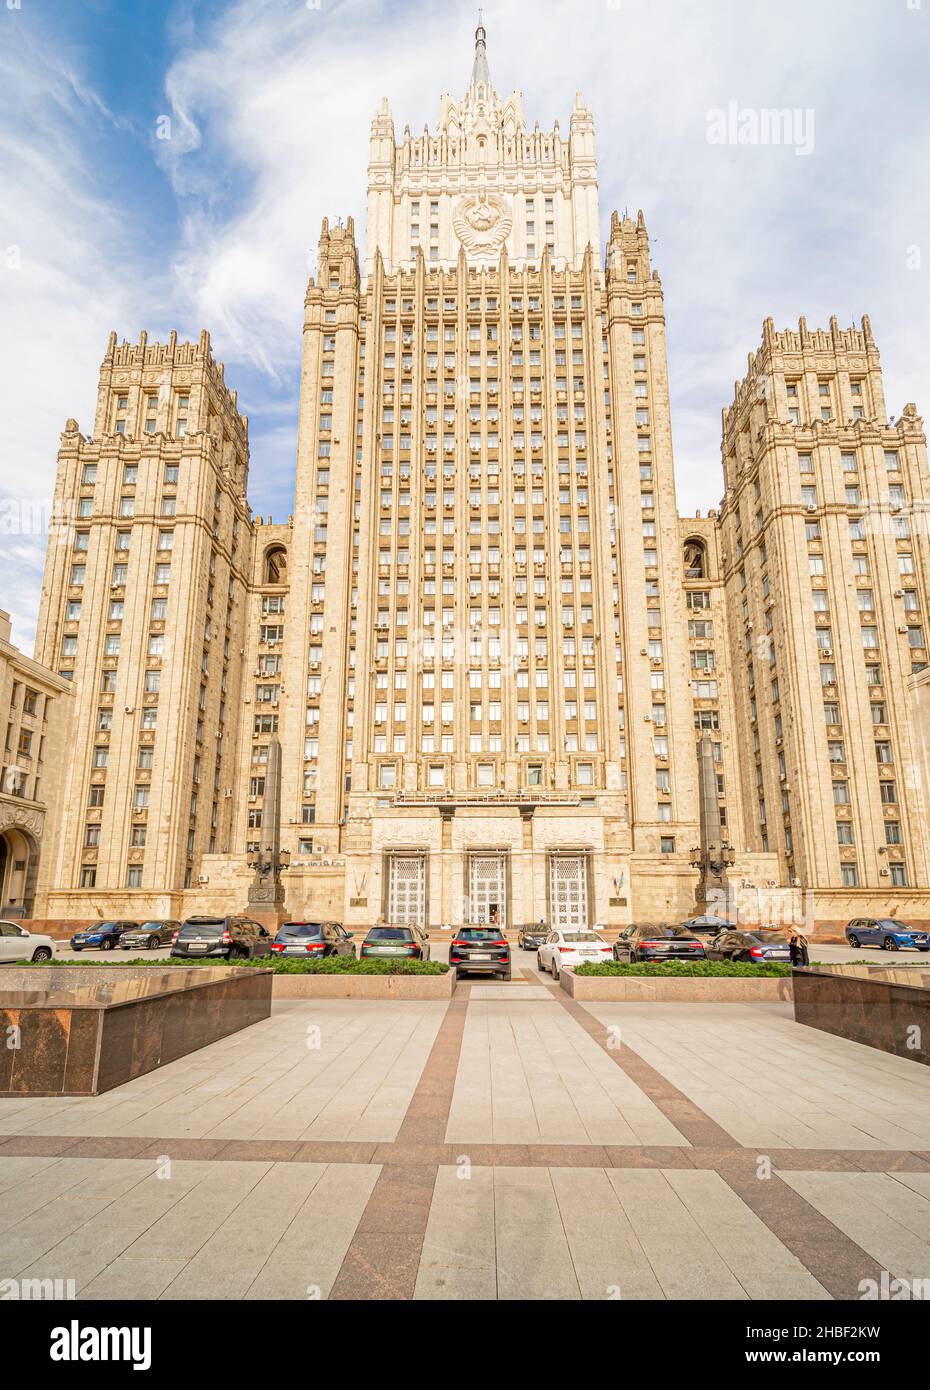 Stalinist architecture landmark- Ministry of Foreign Affairs of Russia main building. MID Skyscraper designed by architects Gelfreykh and Minkus, 1953 Stock Photo